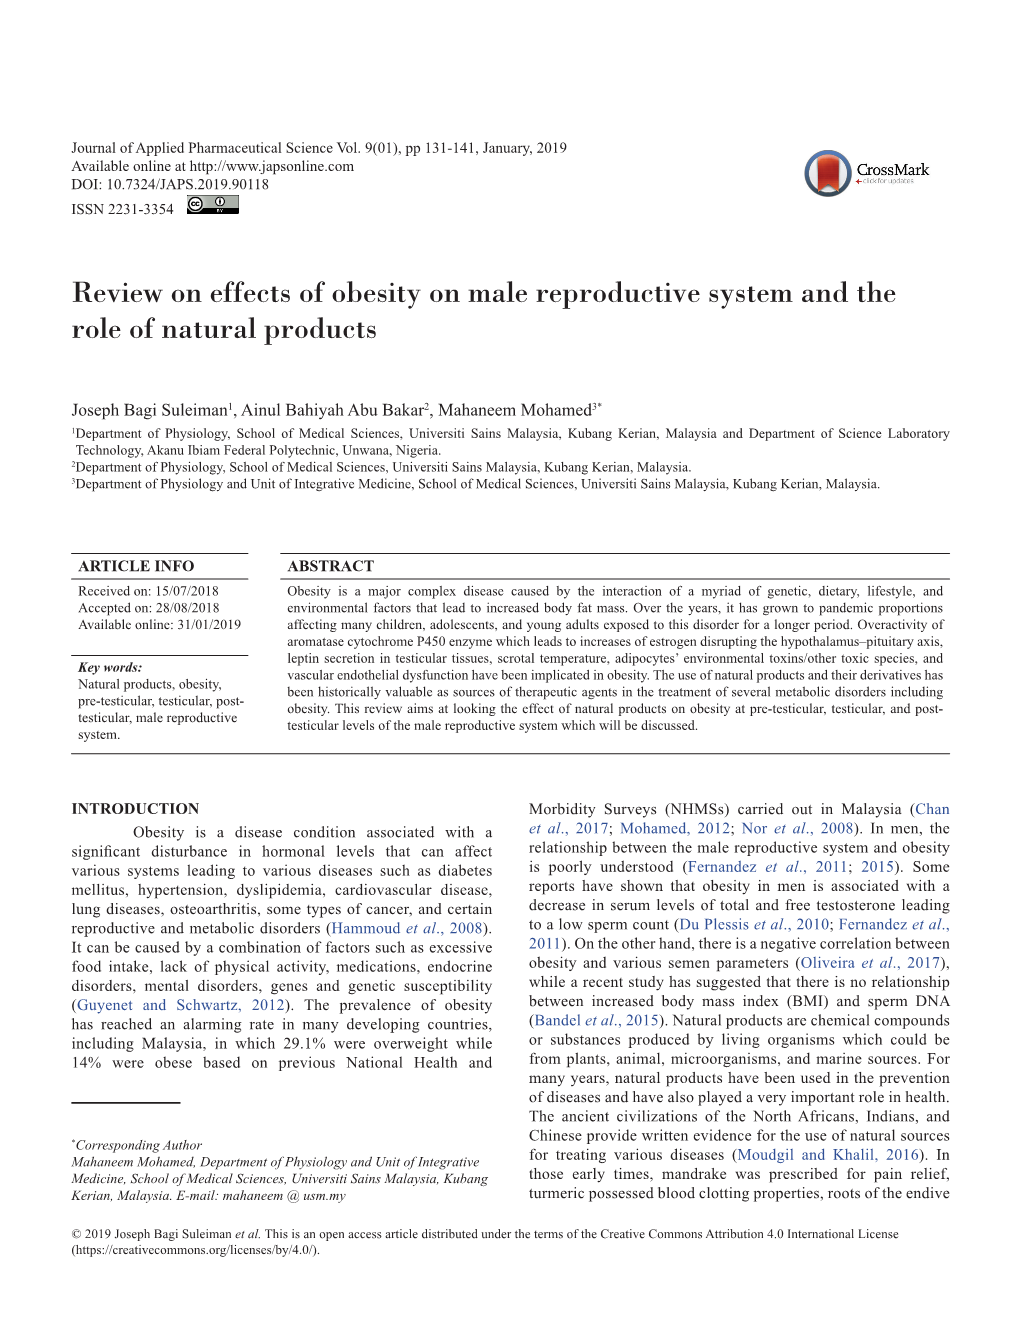 Review on Effects of Obesity on Male Reproductive System and the Role of Natural Products